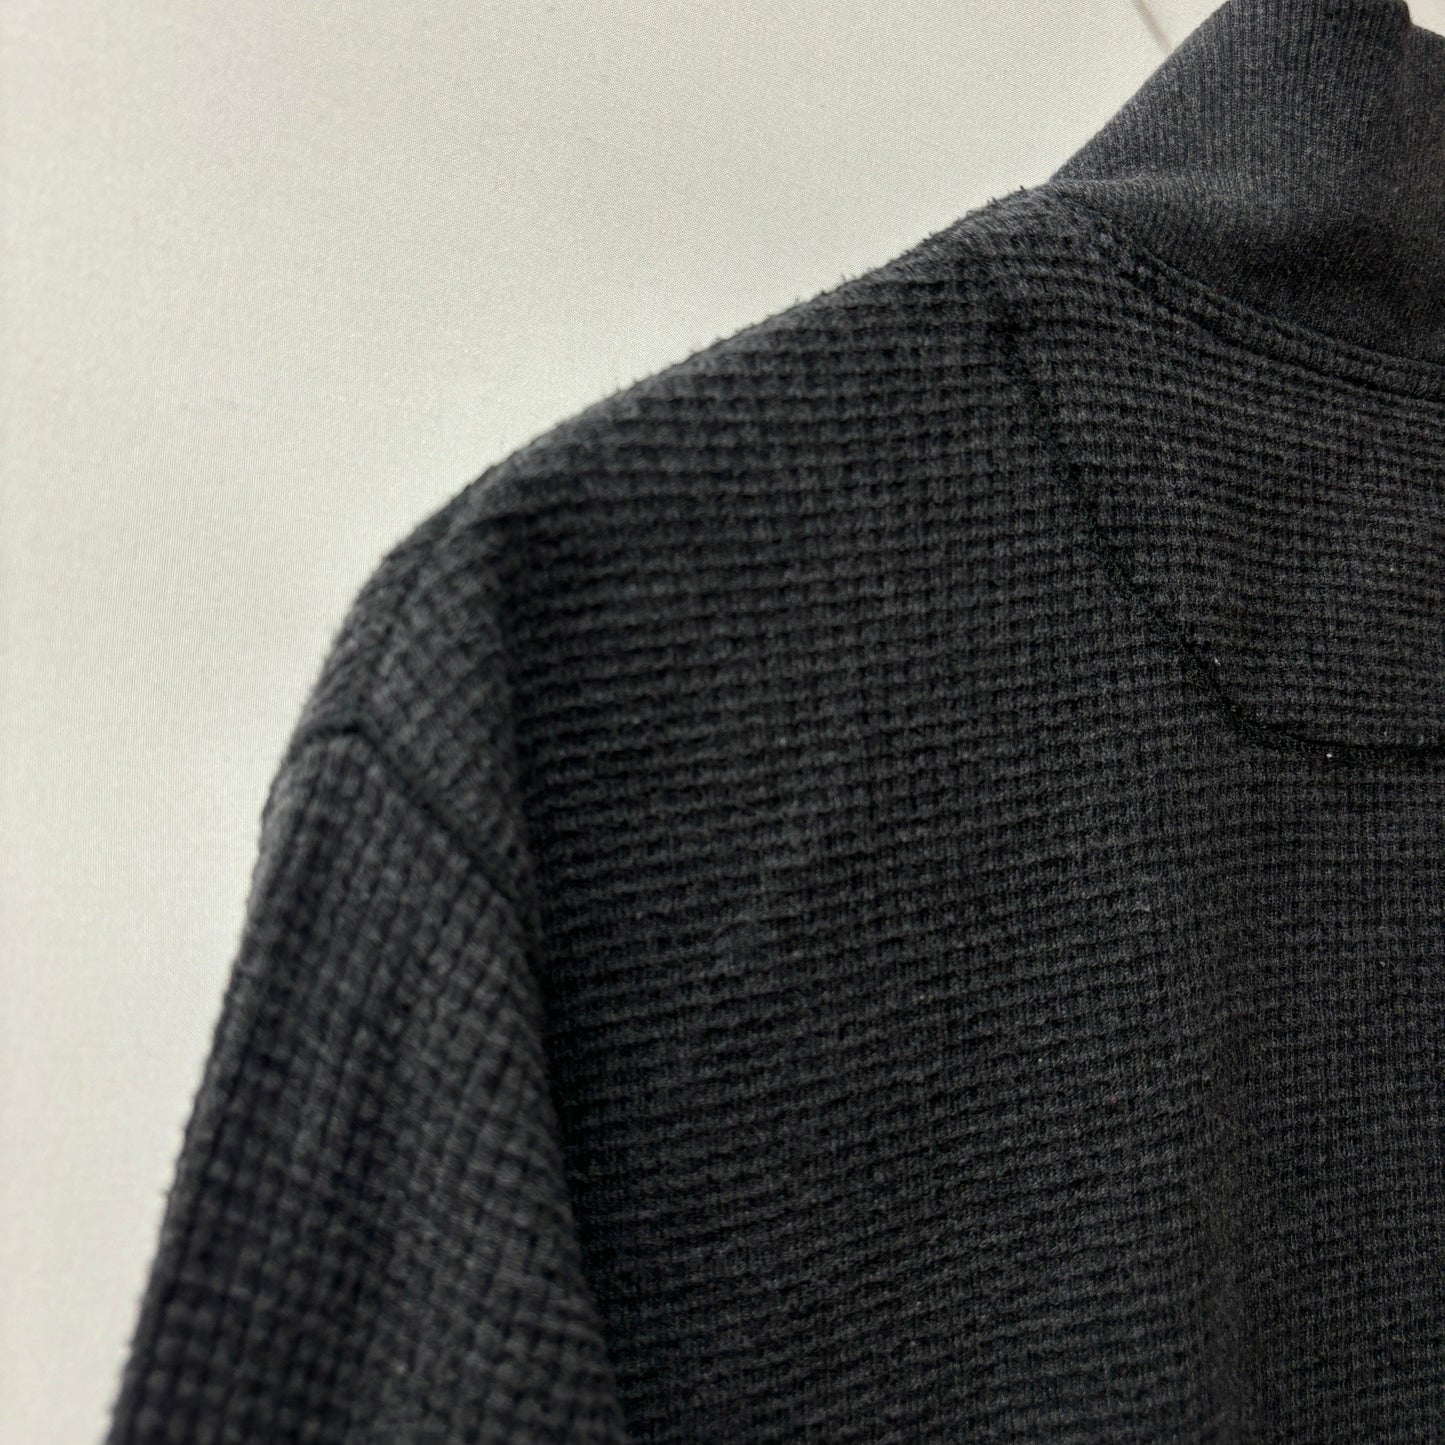 Burberry knit driver's knit